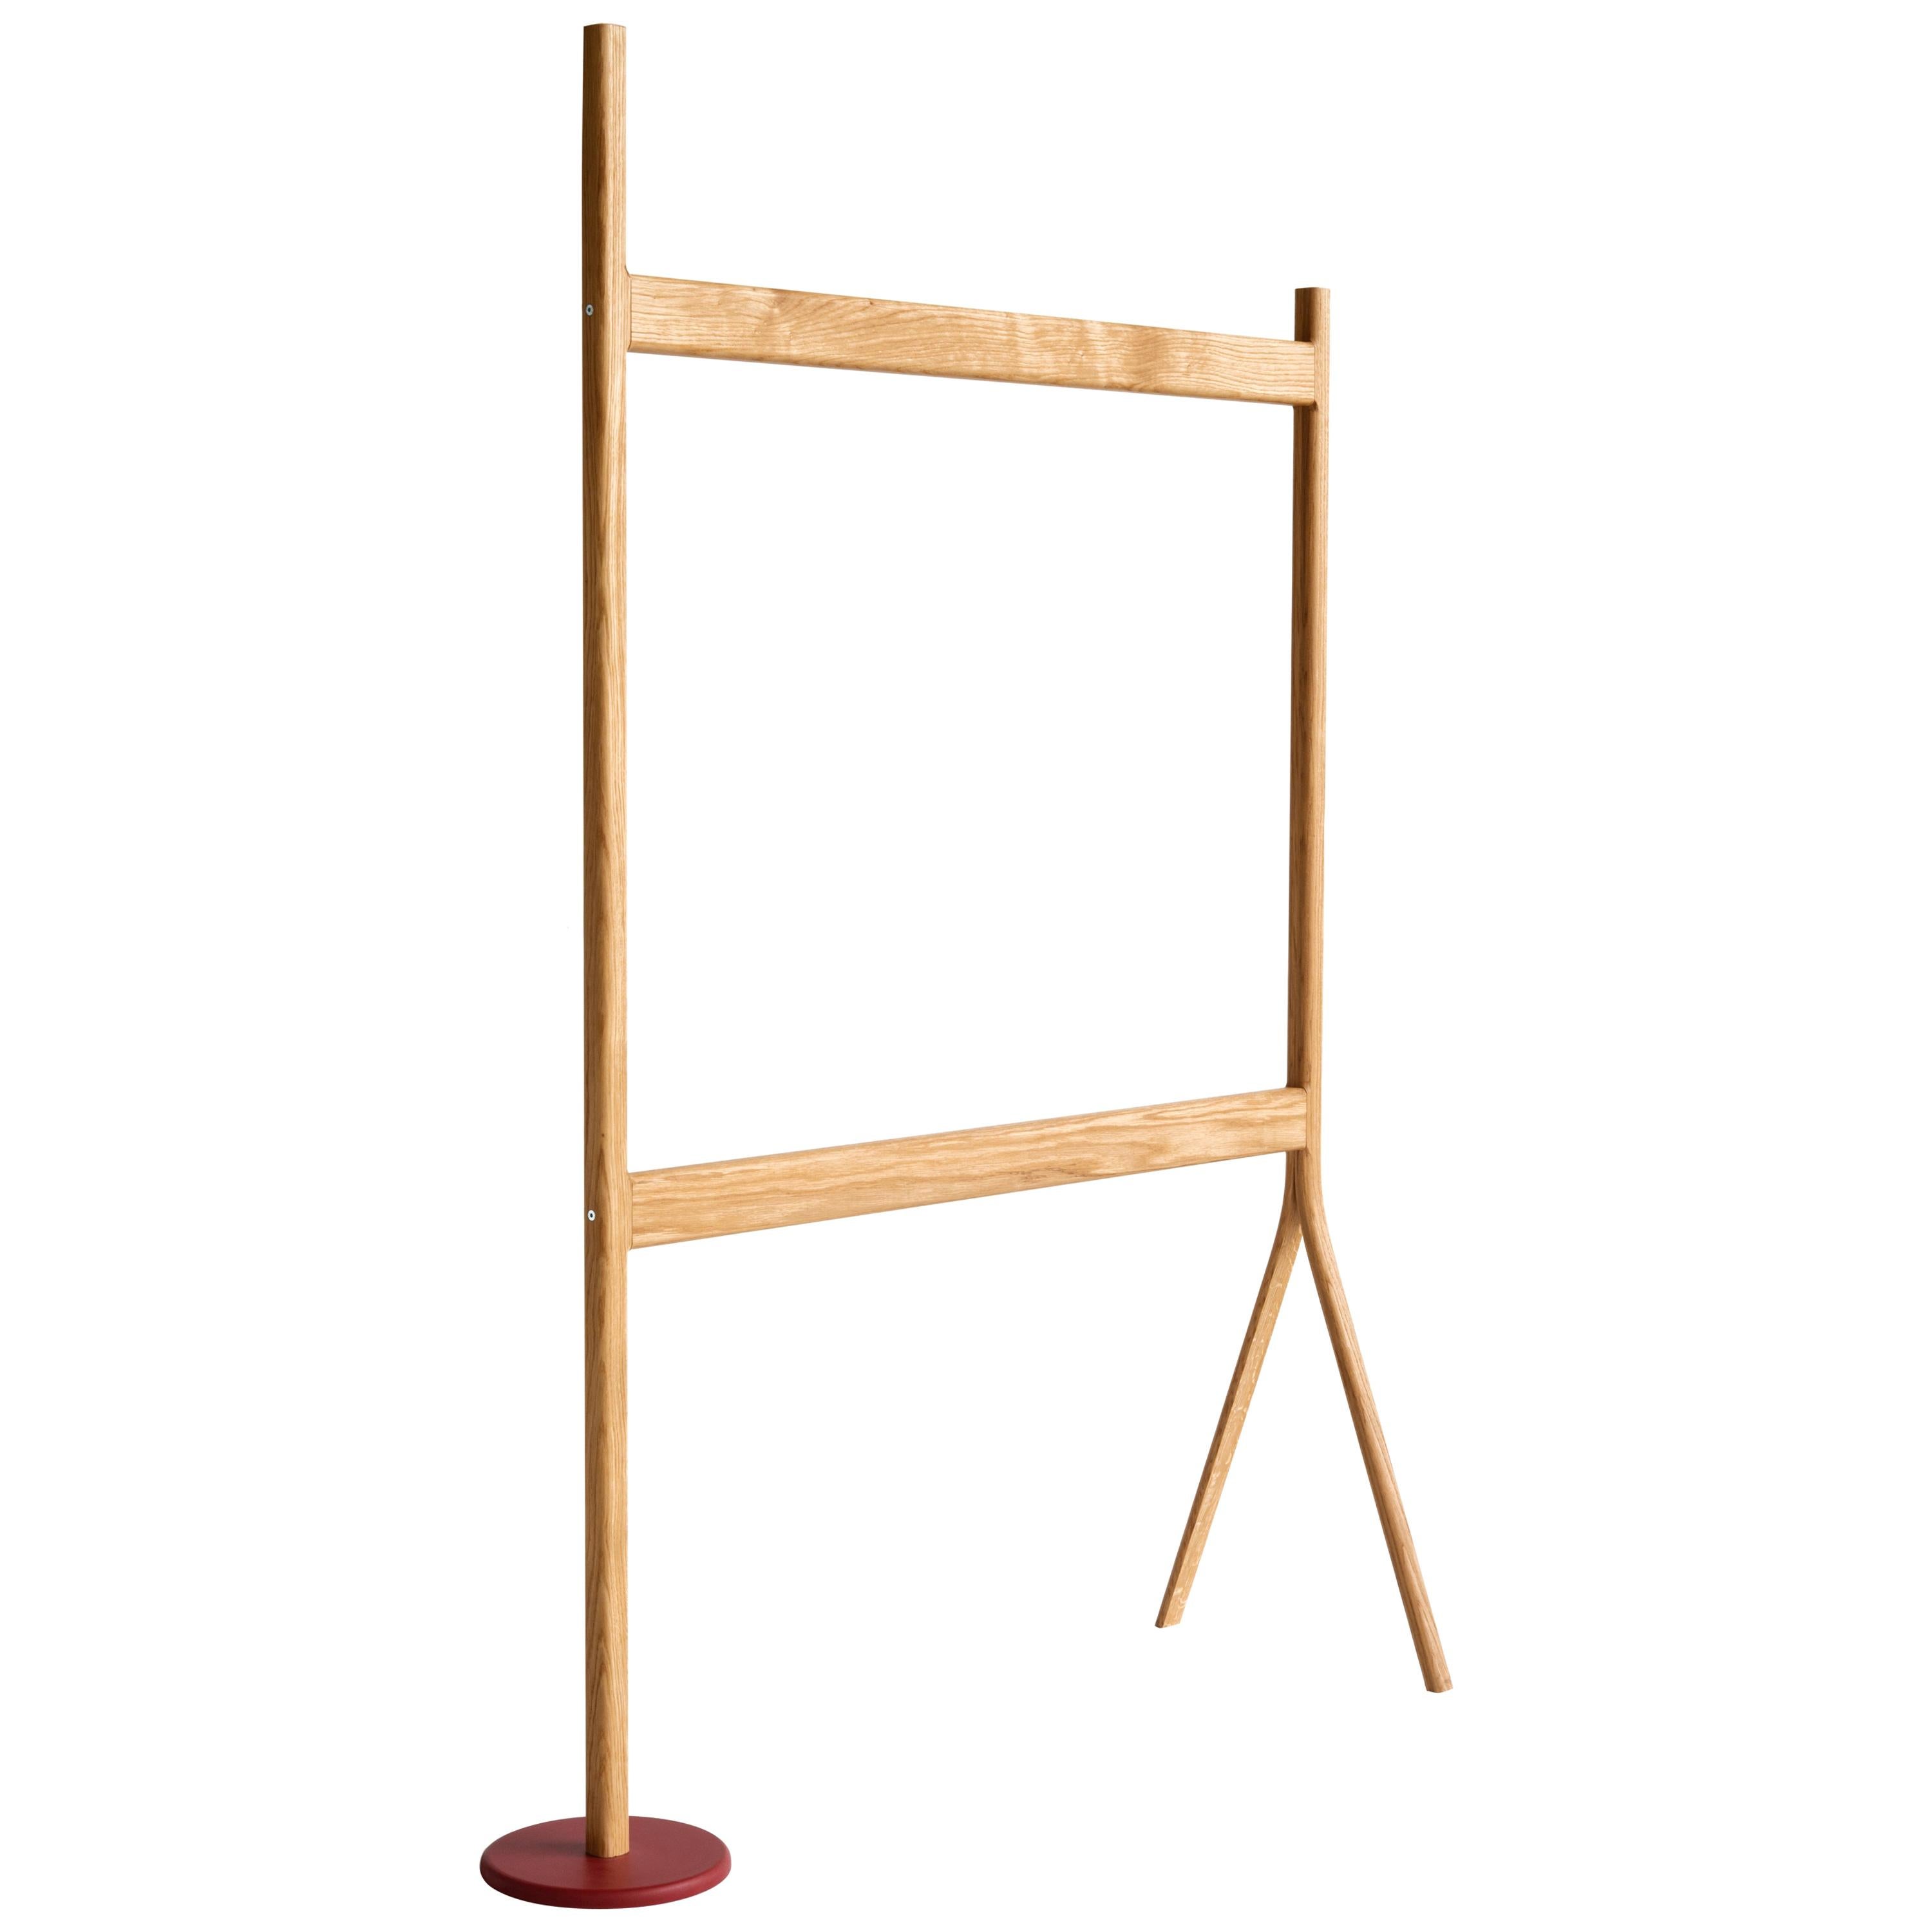 Telo Screen, Natural Oak Frame and Red Lacquered Base, Minimalist Modern Design For Sale